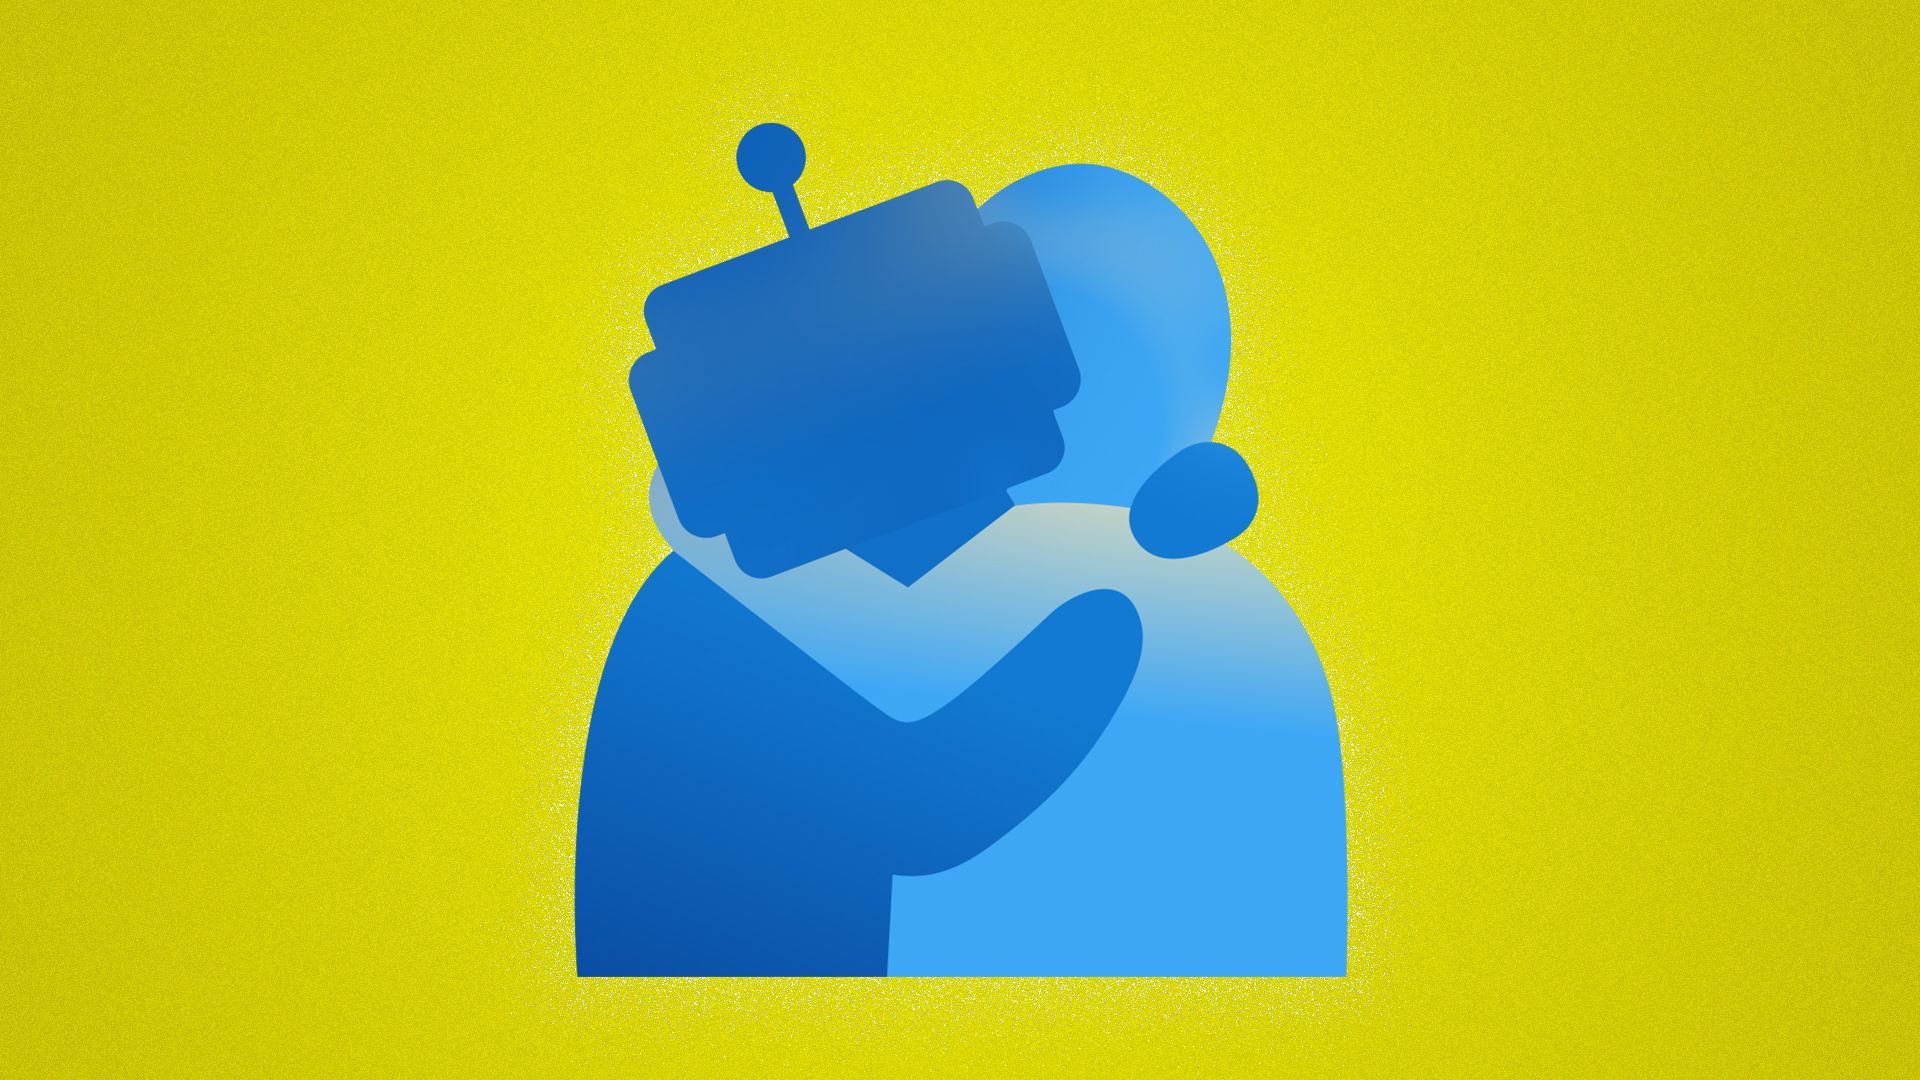 Illustration of the hug emoji with one of the huggers stylized as a robot. 